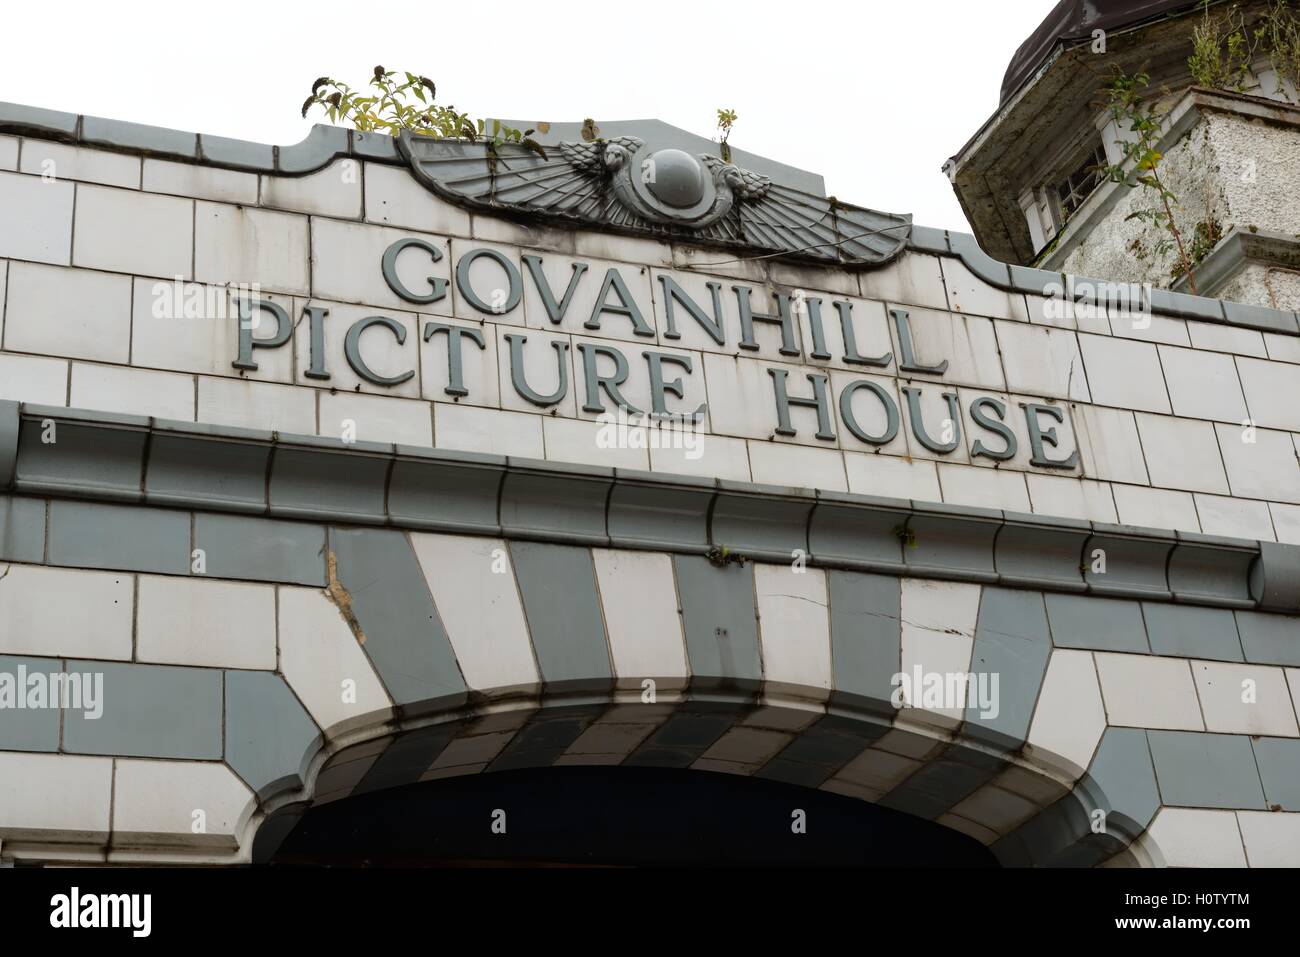 Entrance detail of the derelict Govanhill picture house in Glasgow, Scotland, UK Stock Photo